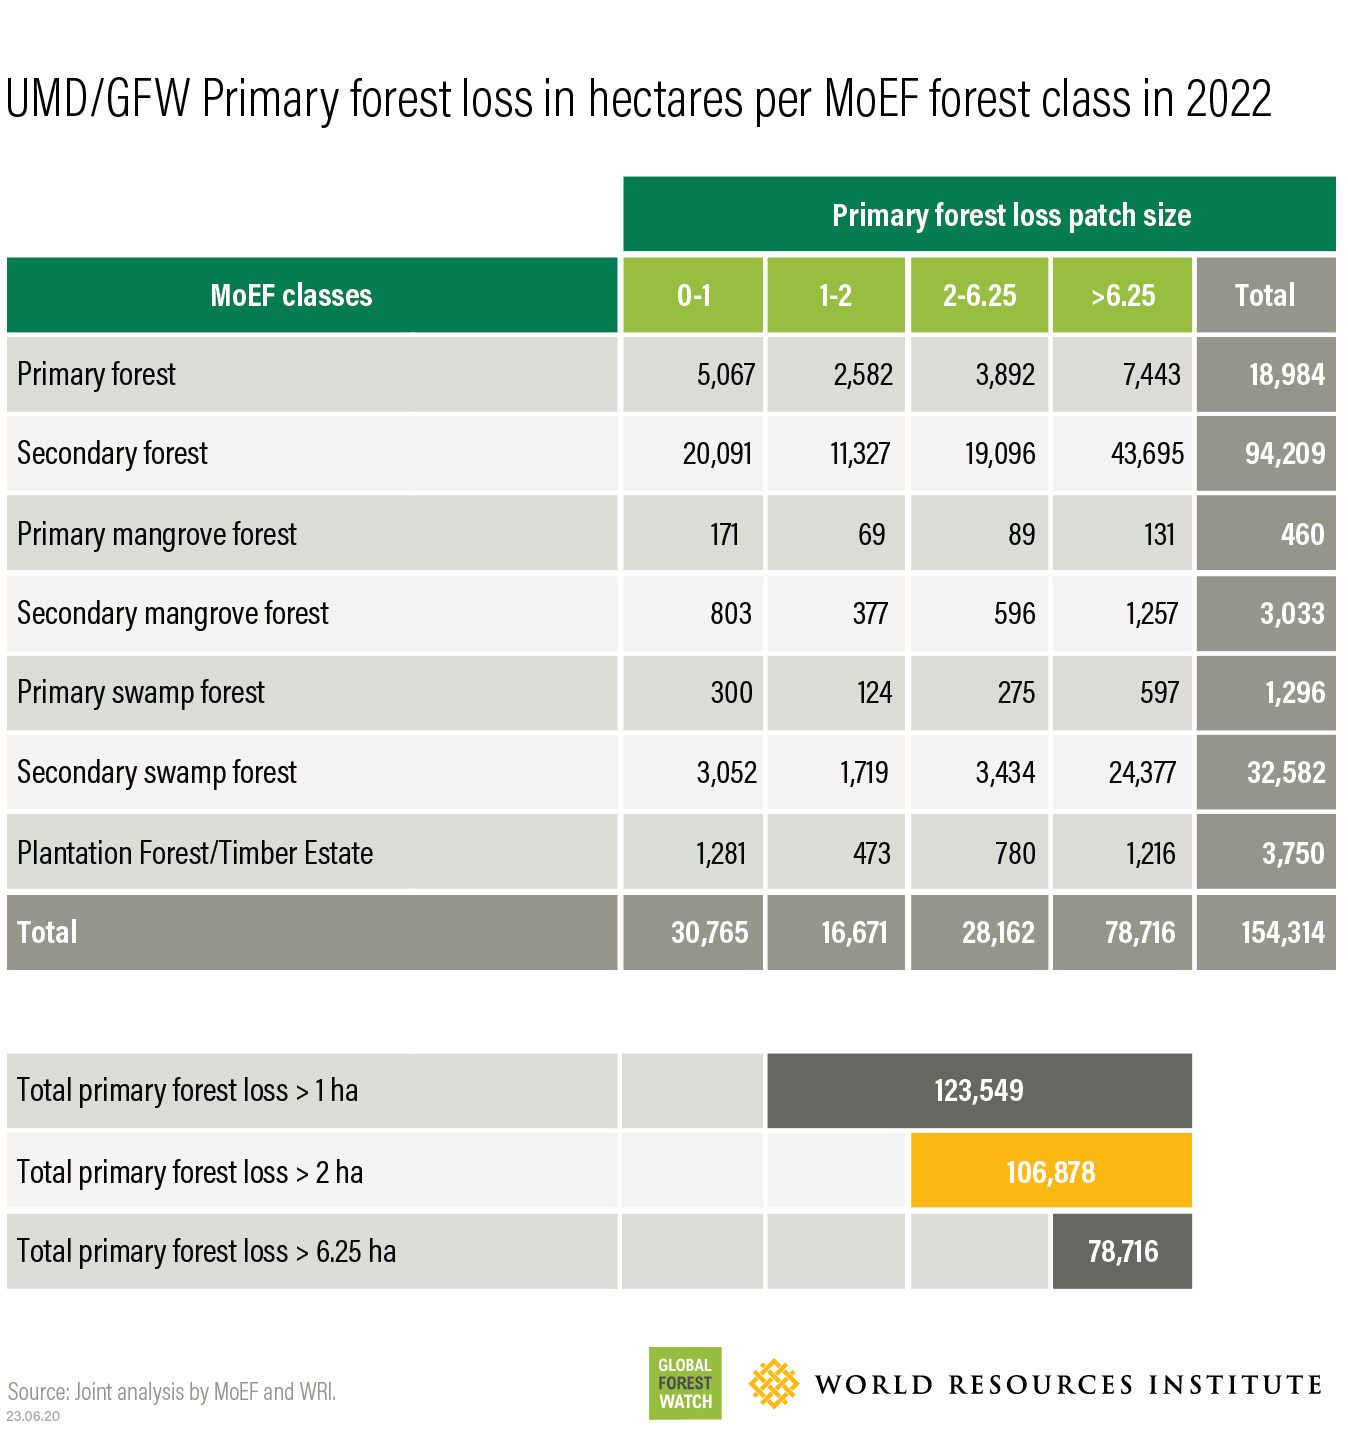 Table showing UMD/GFW primary forest loss in hectares per MoEF forest classes in 2022